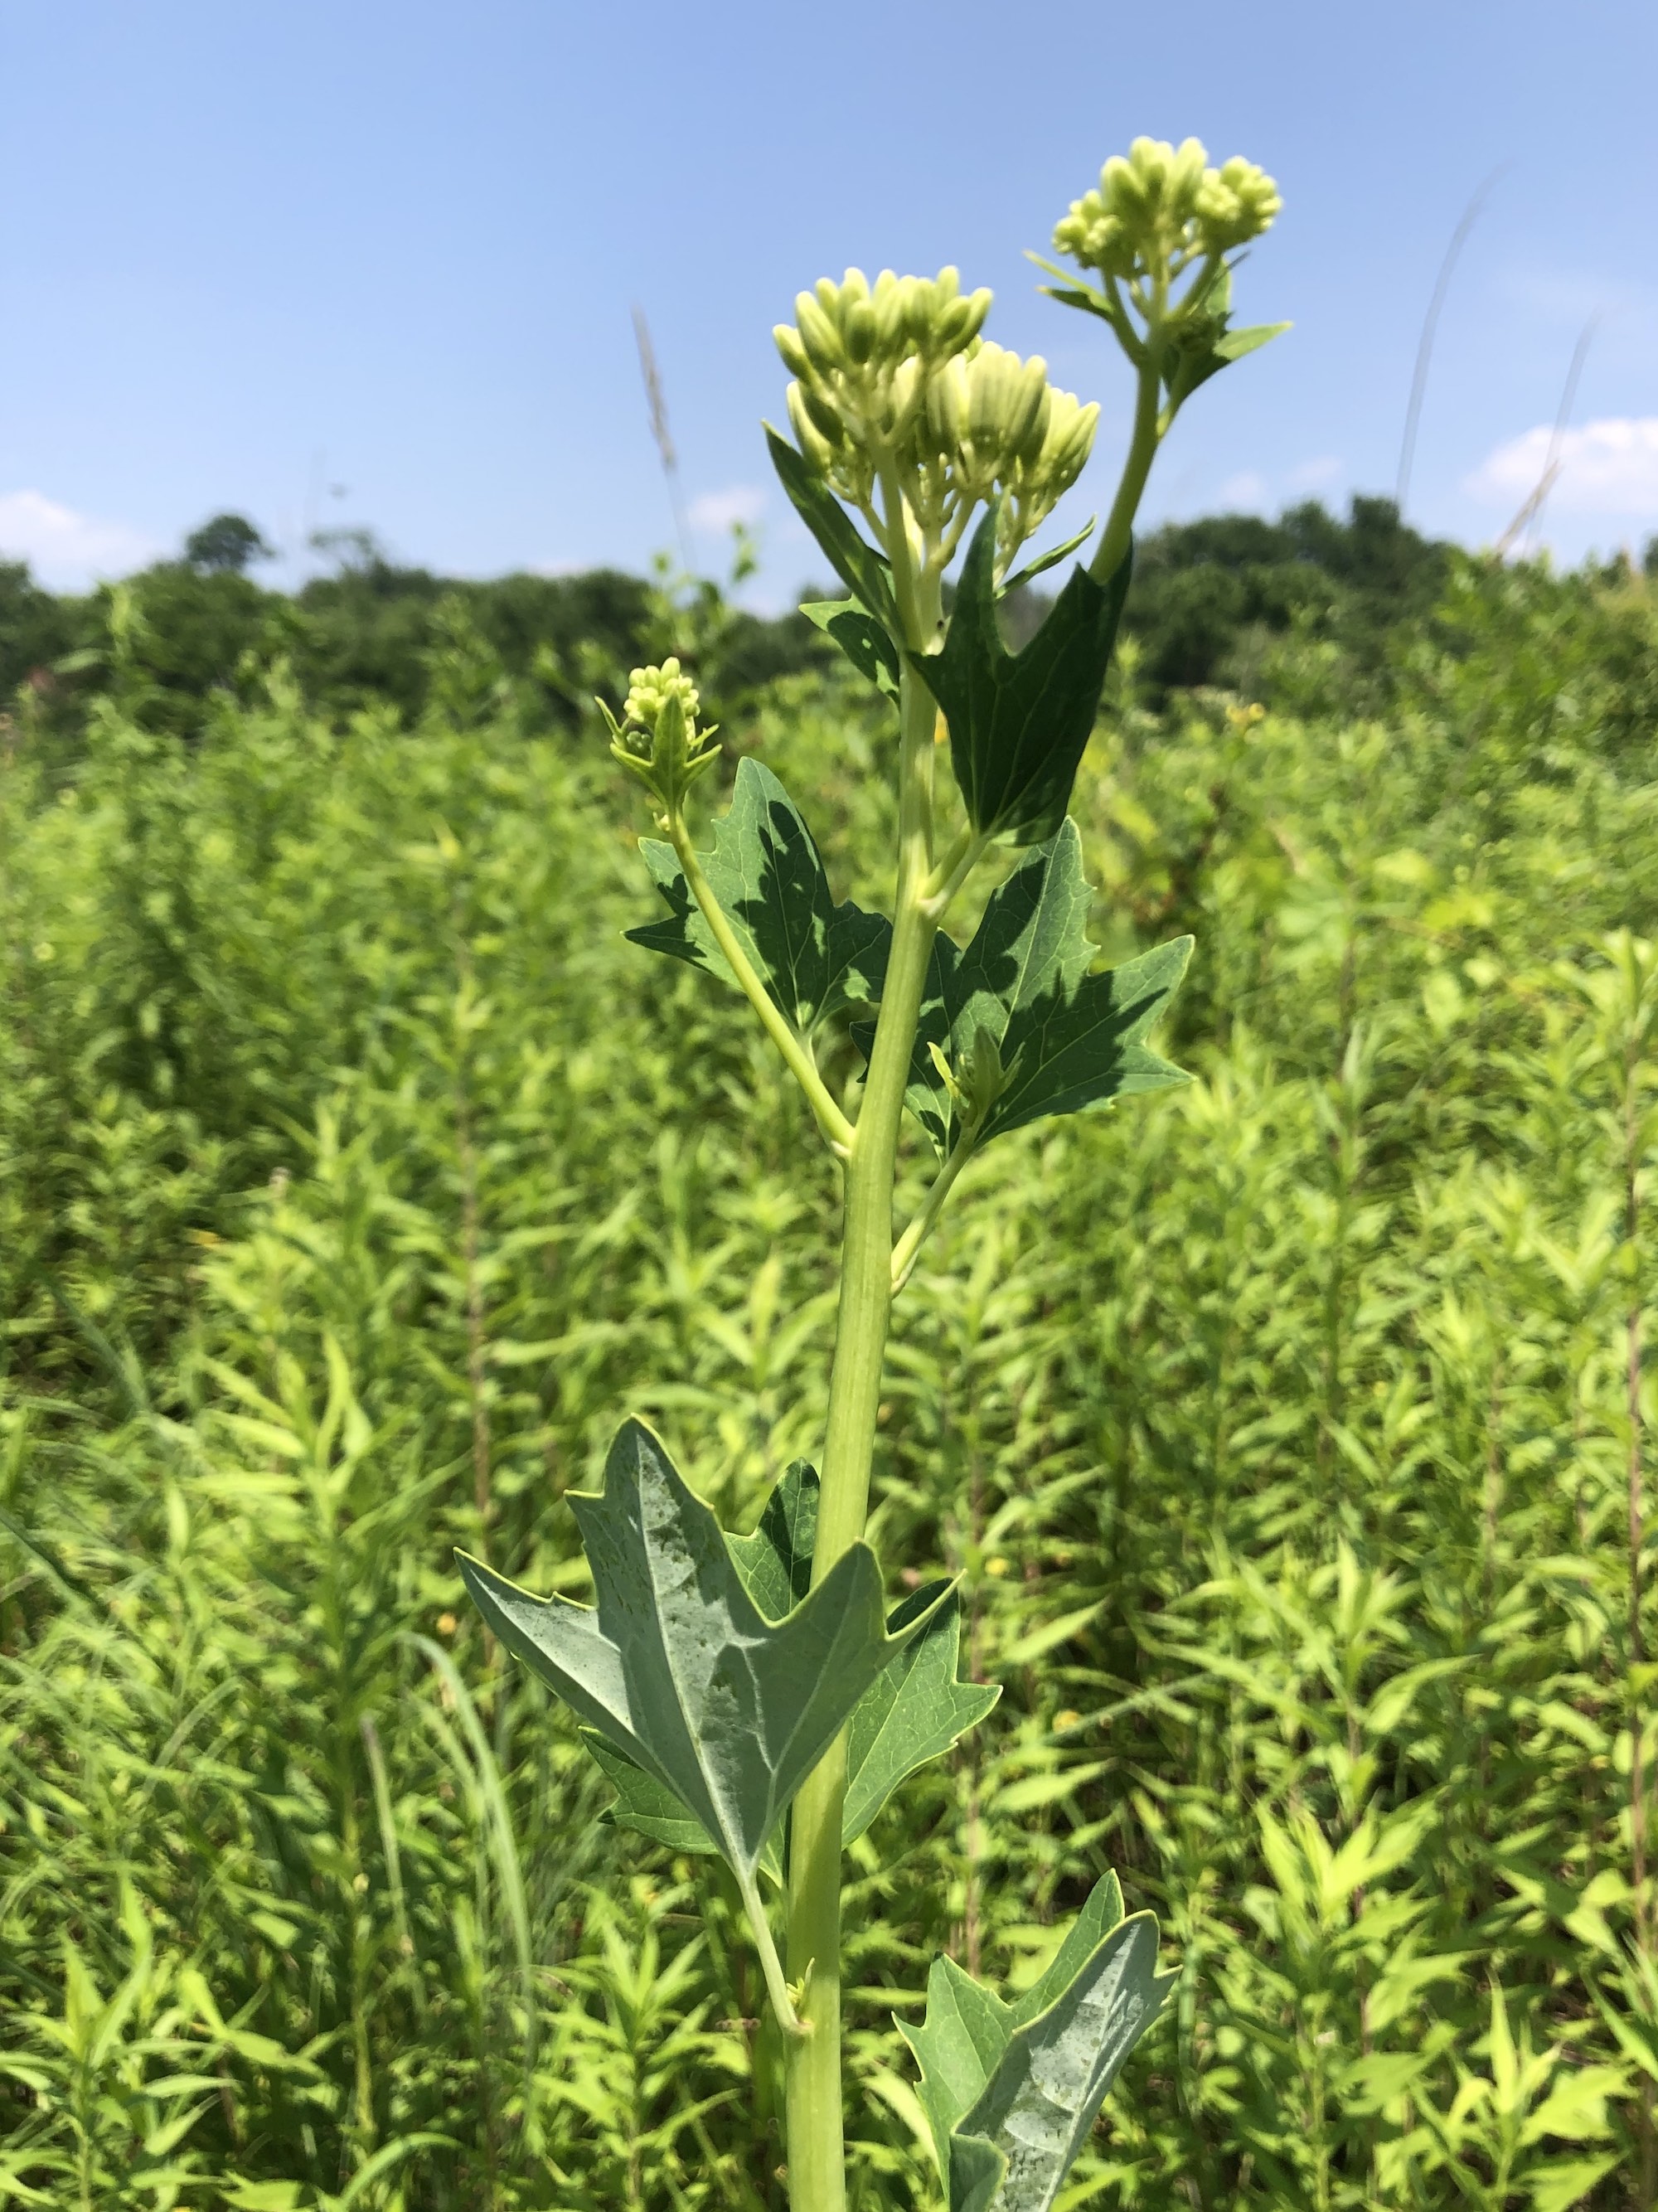 Pale Indian Plantain in Marion Dunn Prairie in Madison, Wisconsin on August 20, 2019.